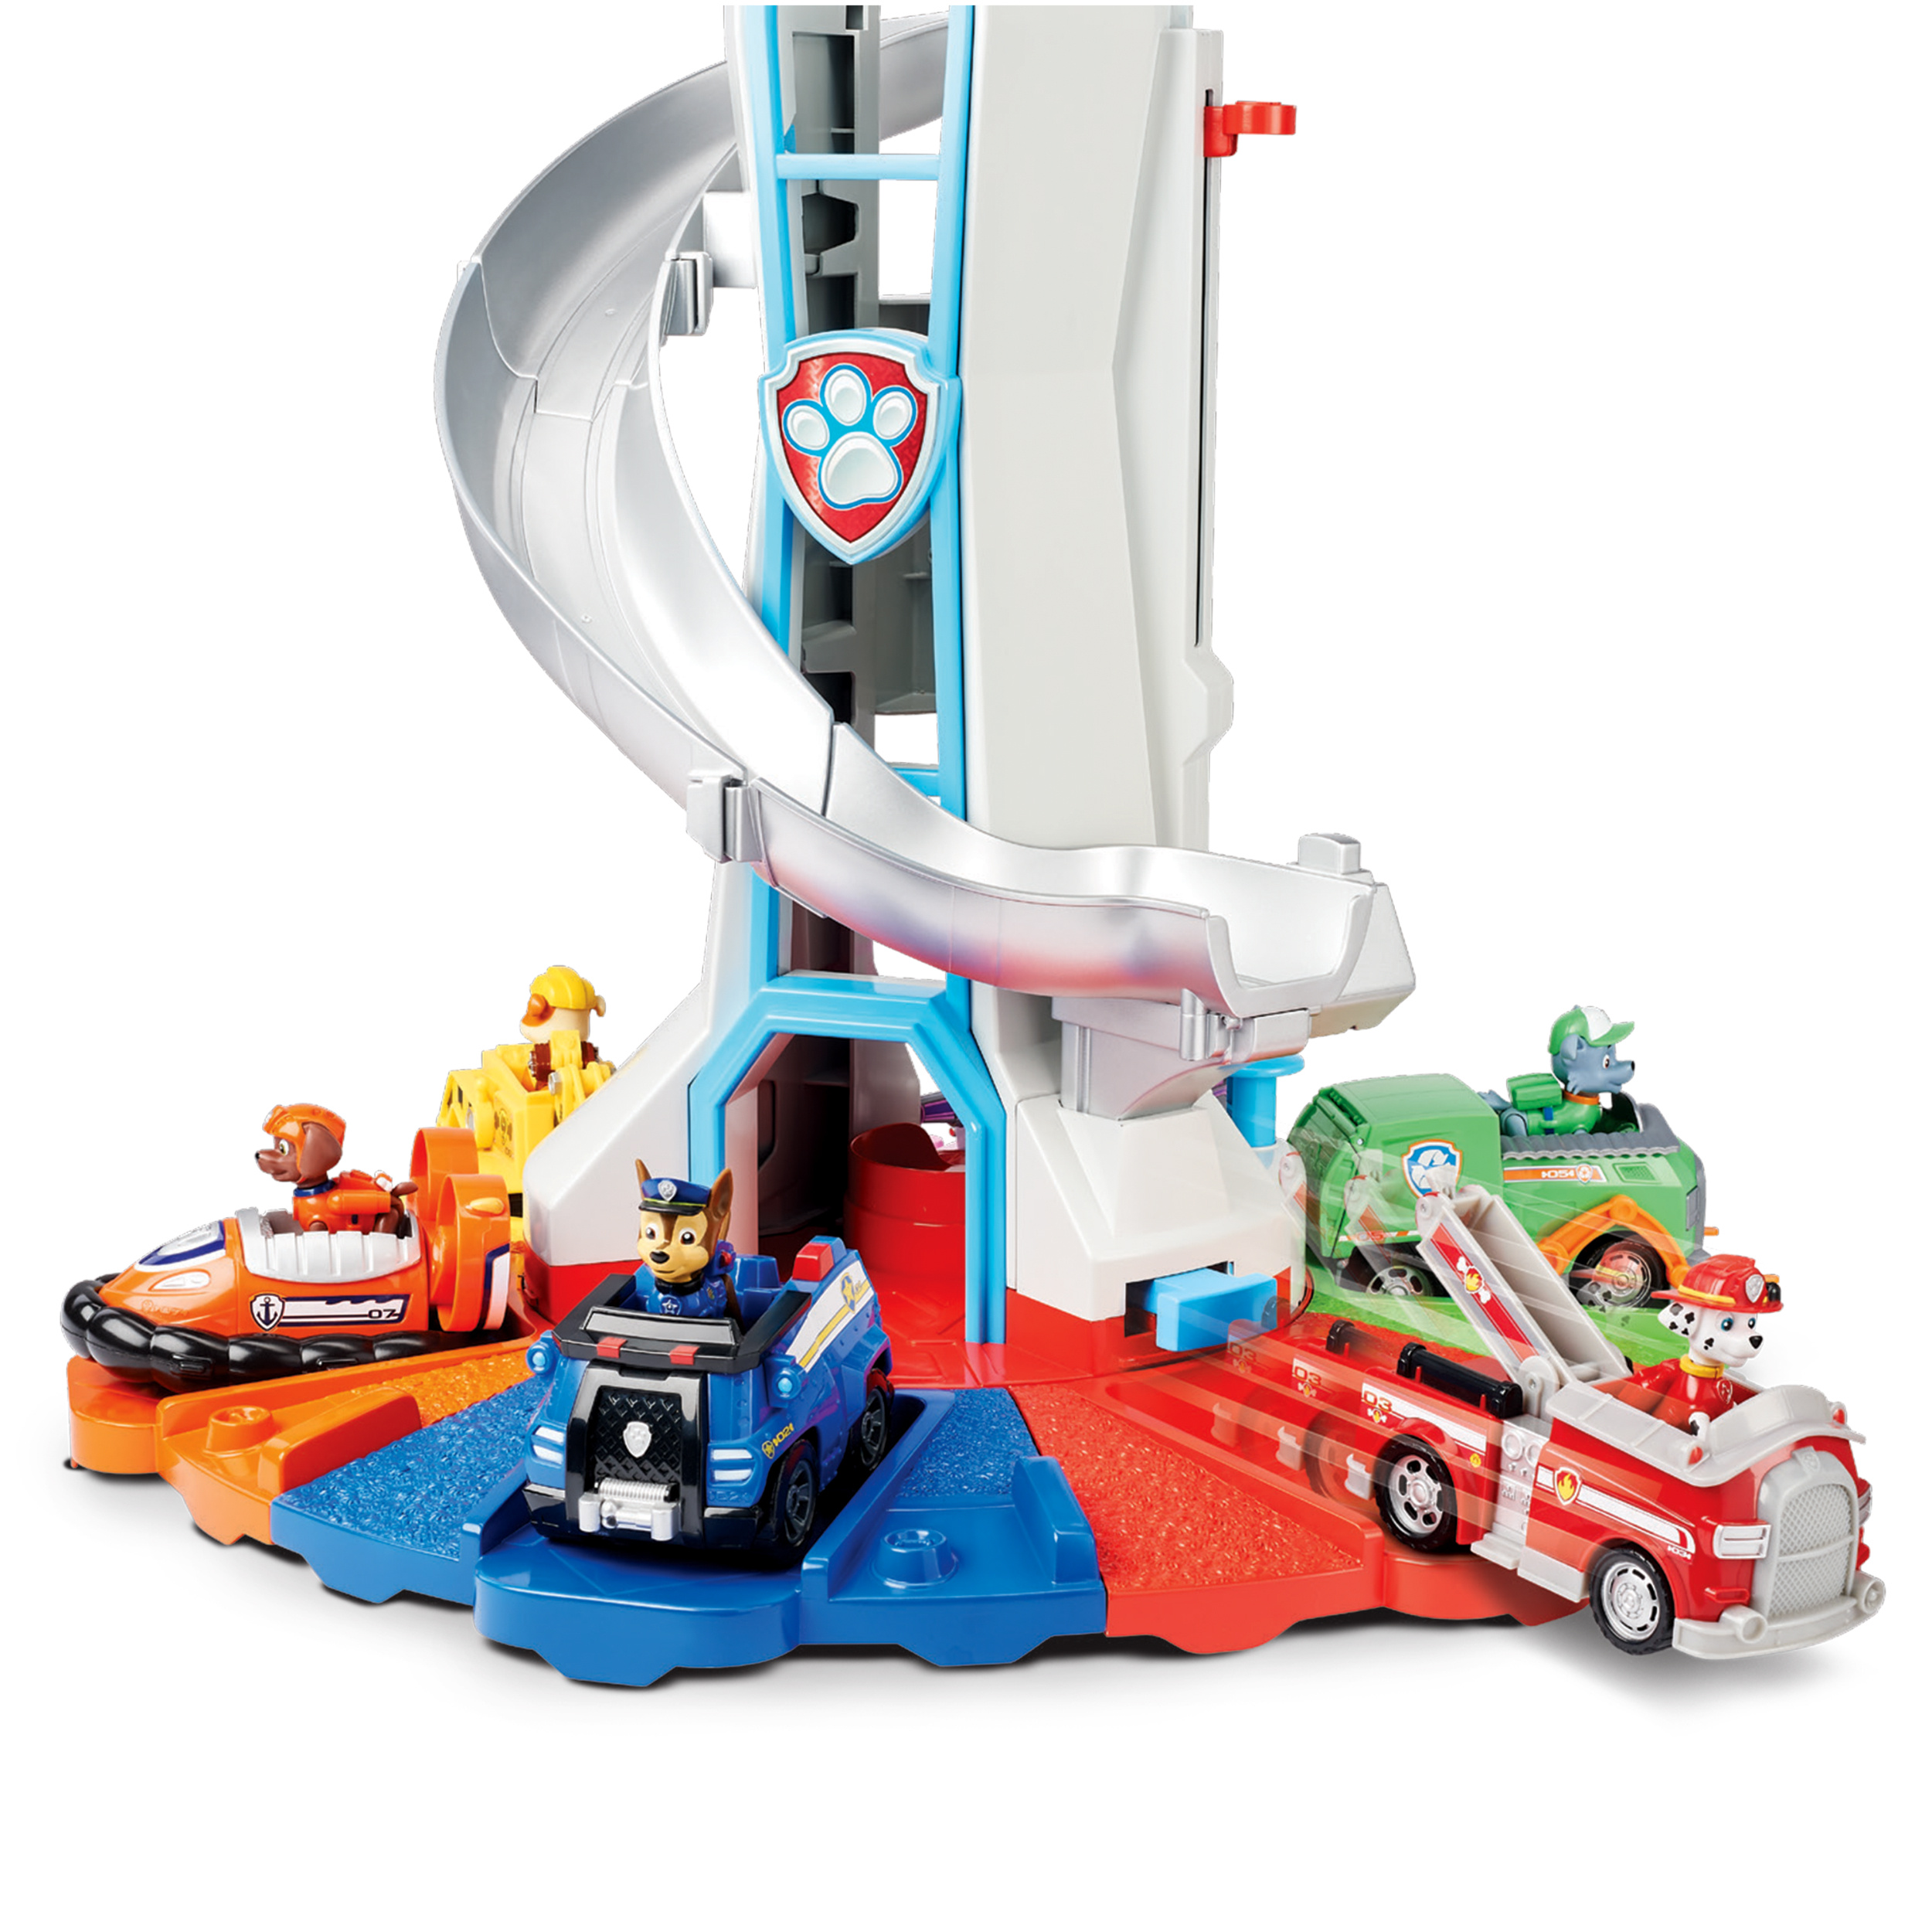 Paw Patrol - My Size Lookout Tower with Exclusive Vehicle, Rotating Periscope and Lights and Sounds - image 5 of 8